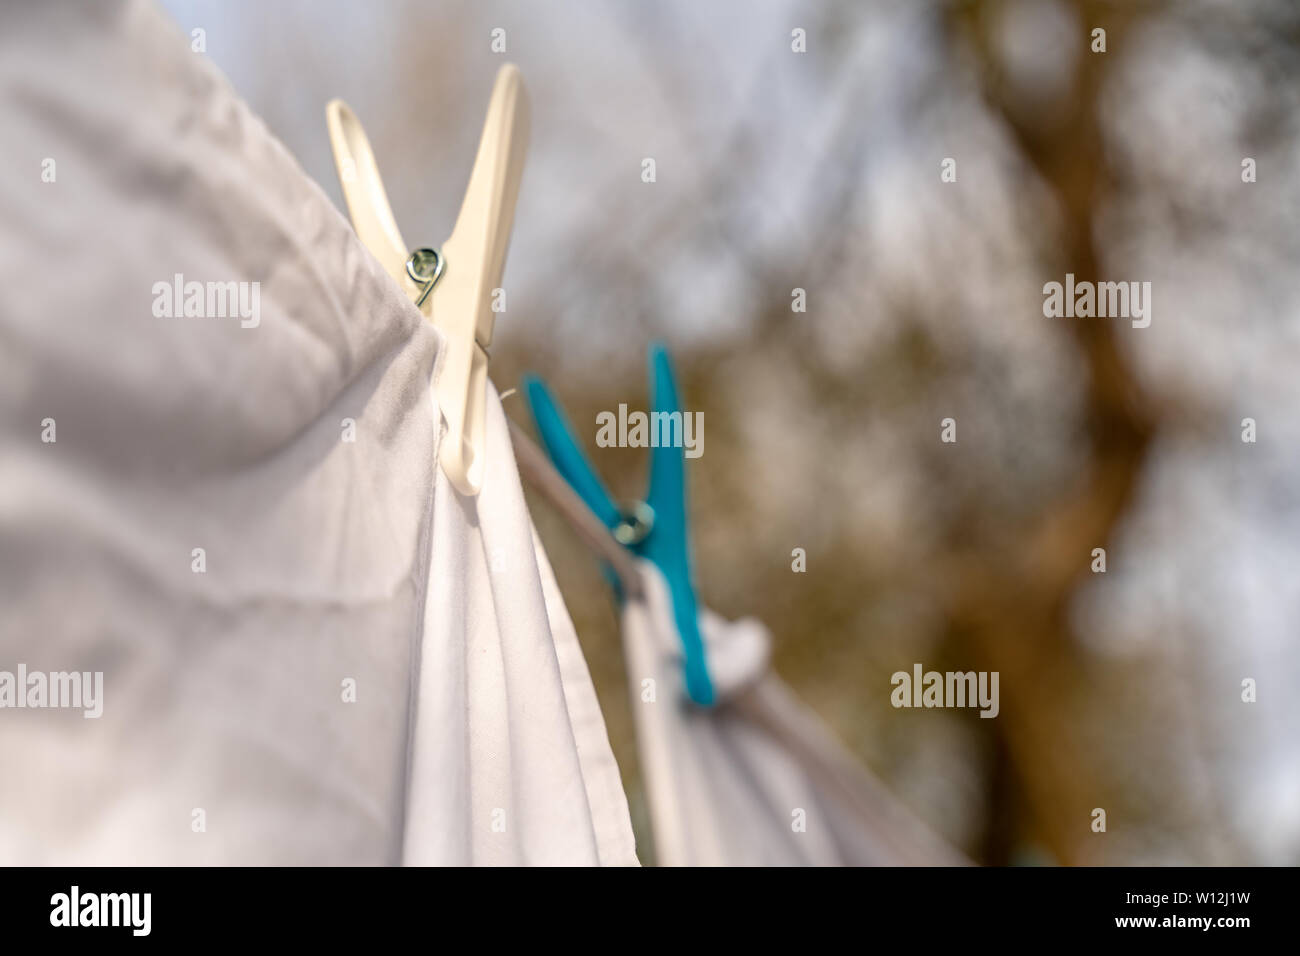 White clothes hung out to dry on a washing line and fastened by the clothes pegs in the bright warm sunny day. Blurred garden at the background. Stock Photo